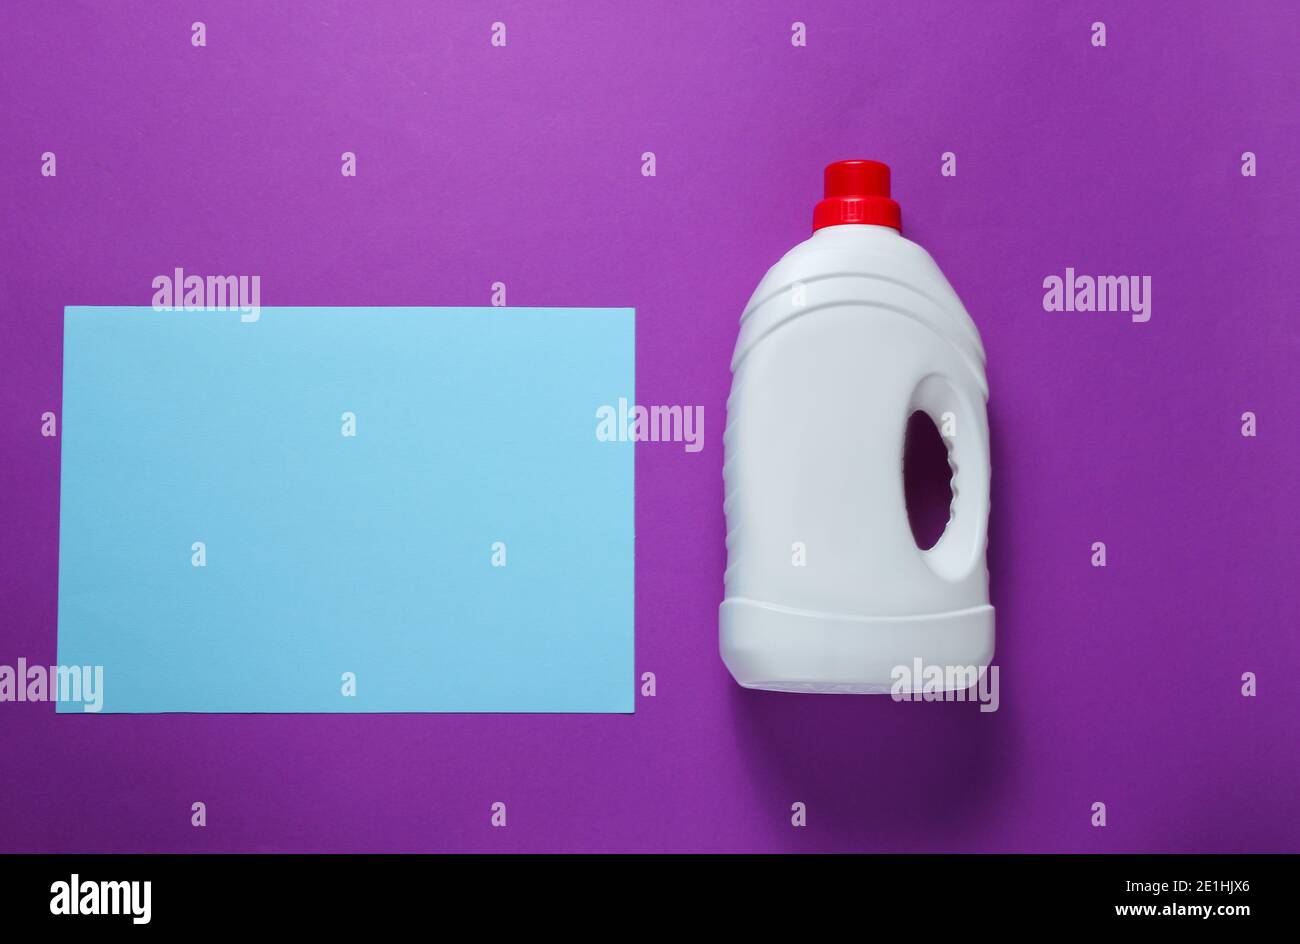 Minimalistic concept of washing. Blue paper sheet for copy space, bottle of washing gel on purple background. Top view Stock Photo